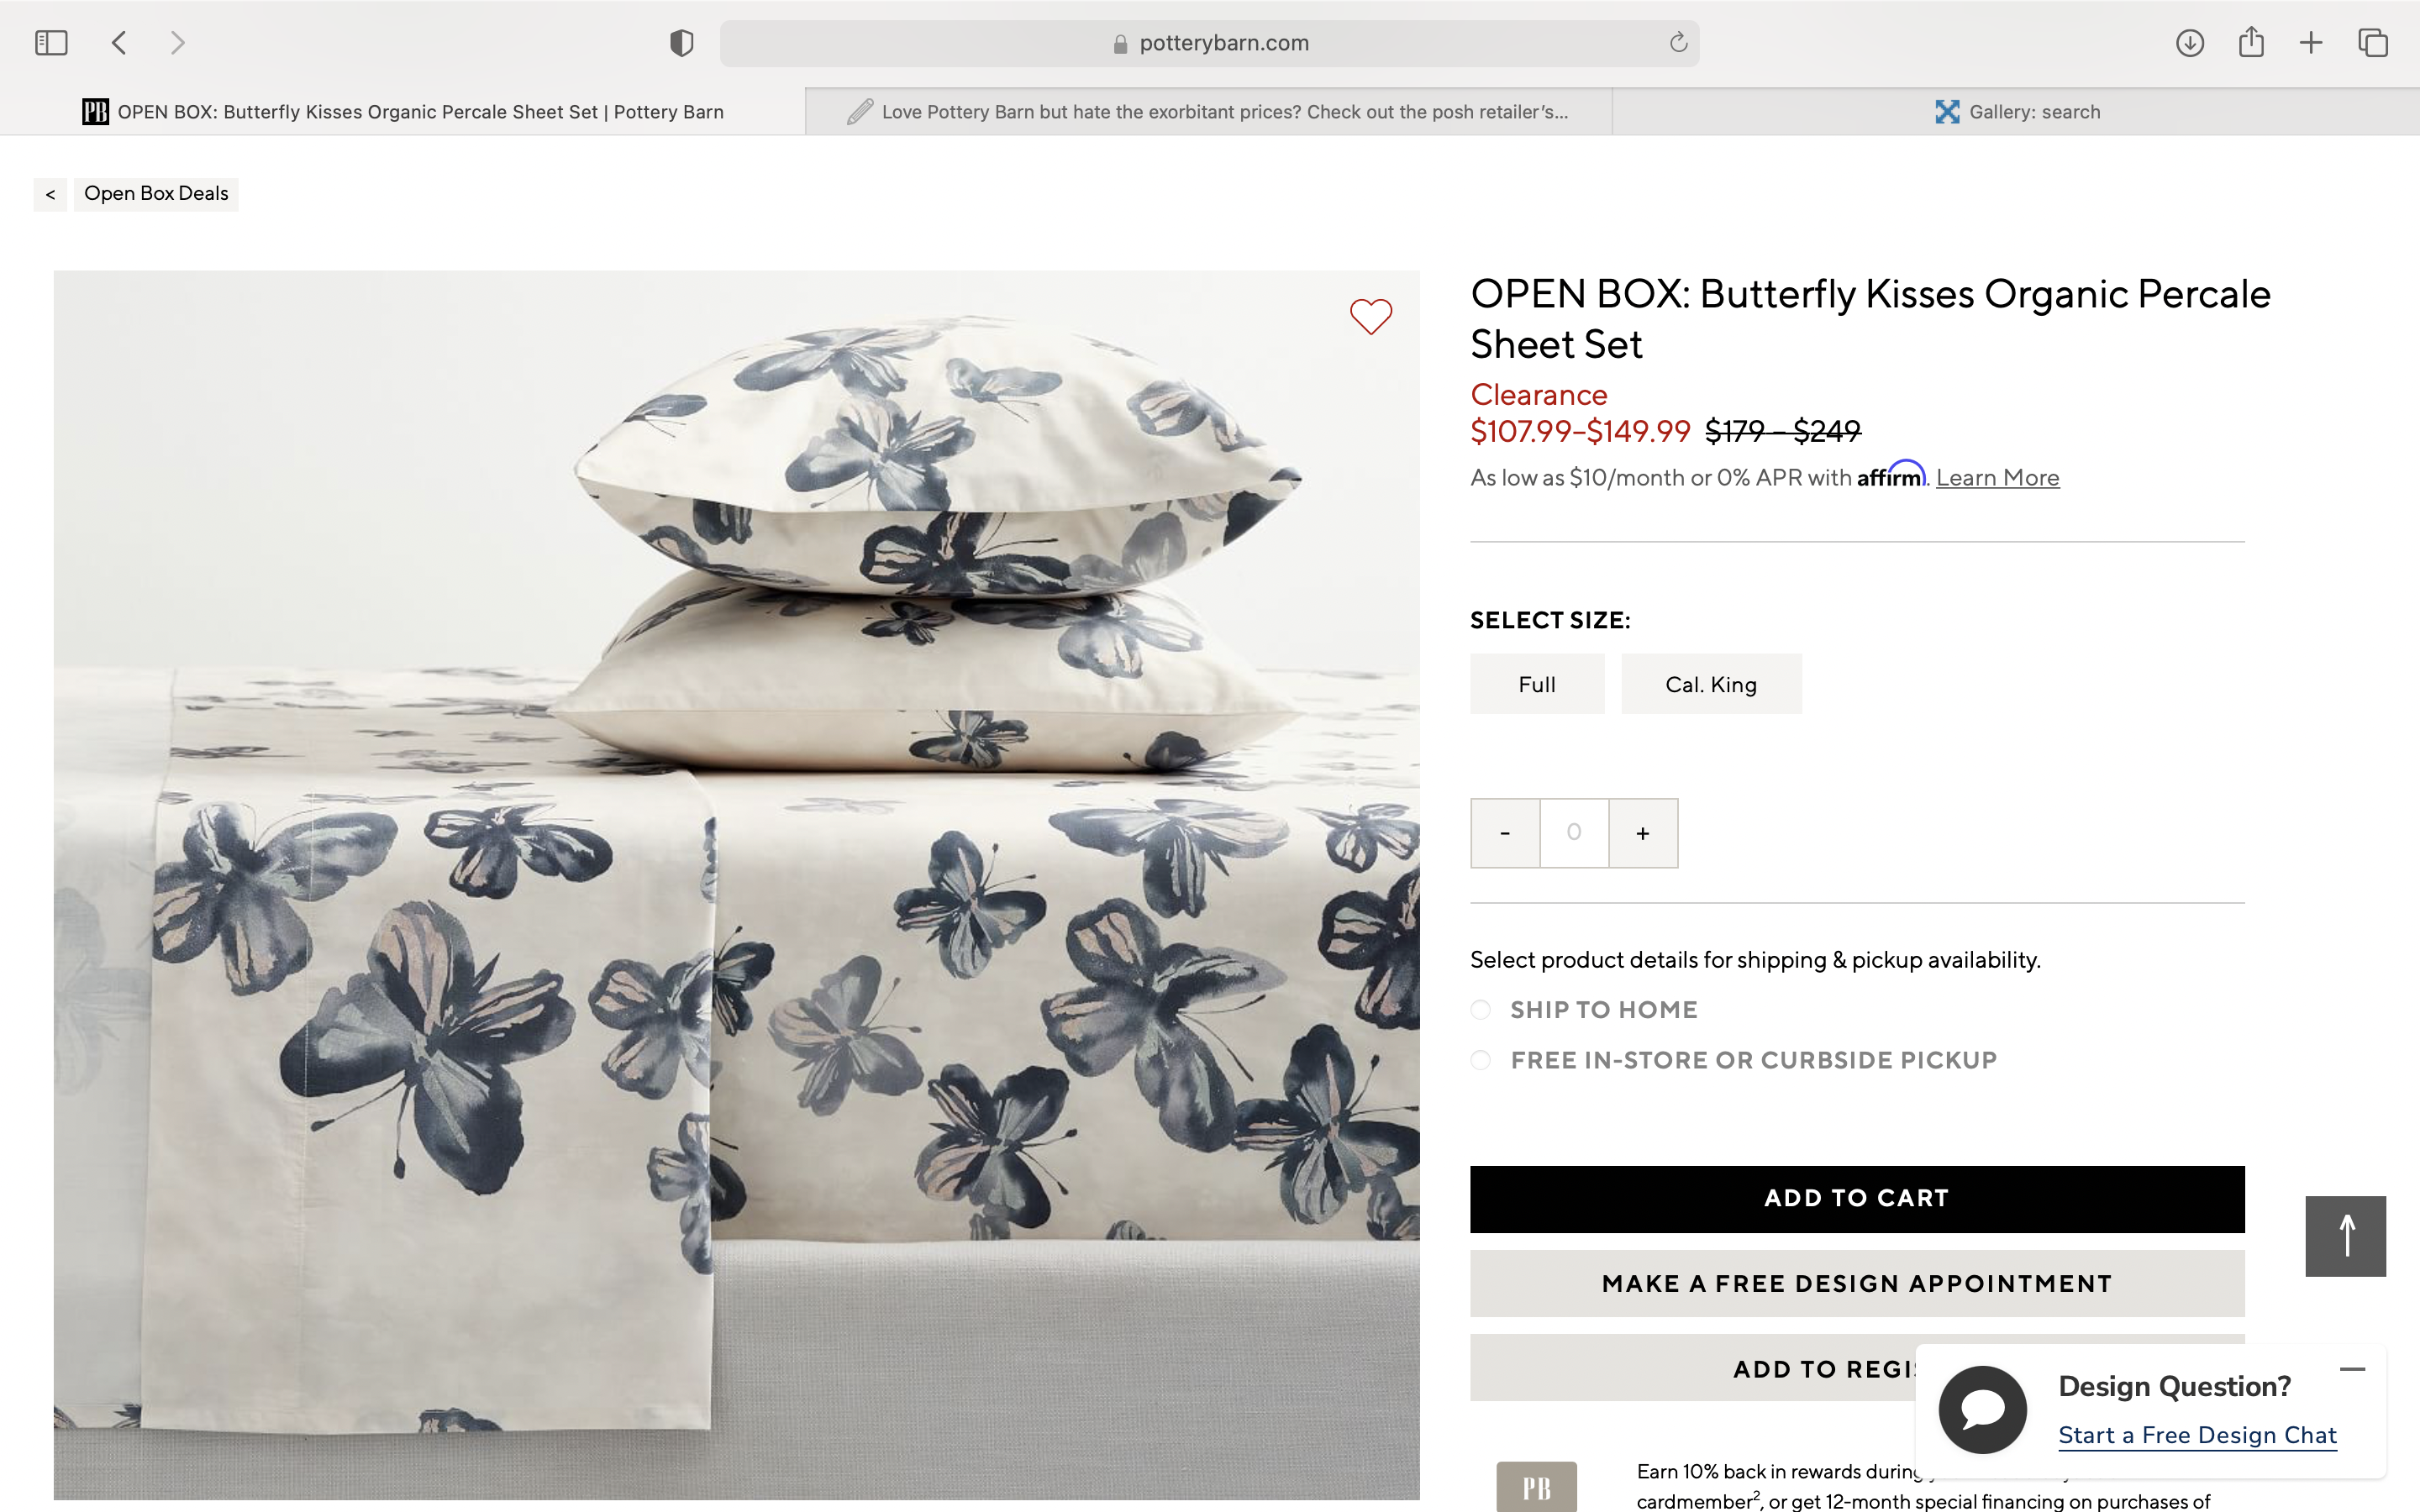 Love Pottery Barn but hate paying the high prices? Check out the retailer's  little-known 'Open Box' online outlet. 